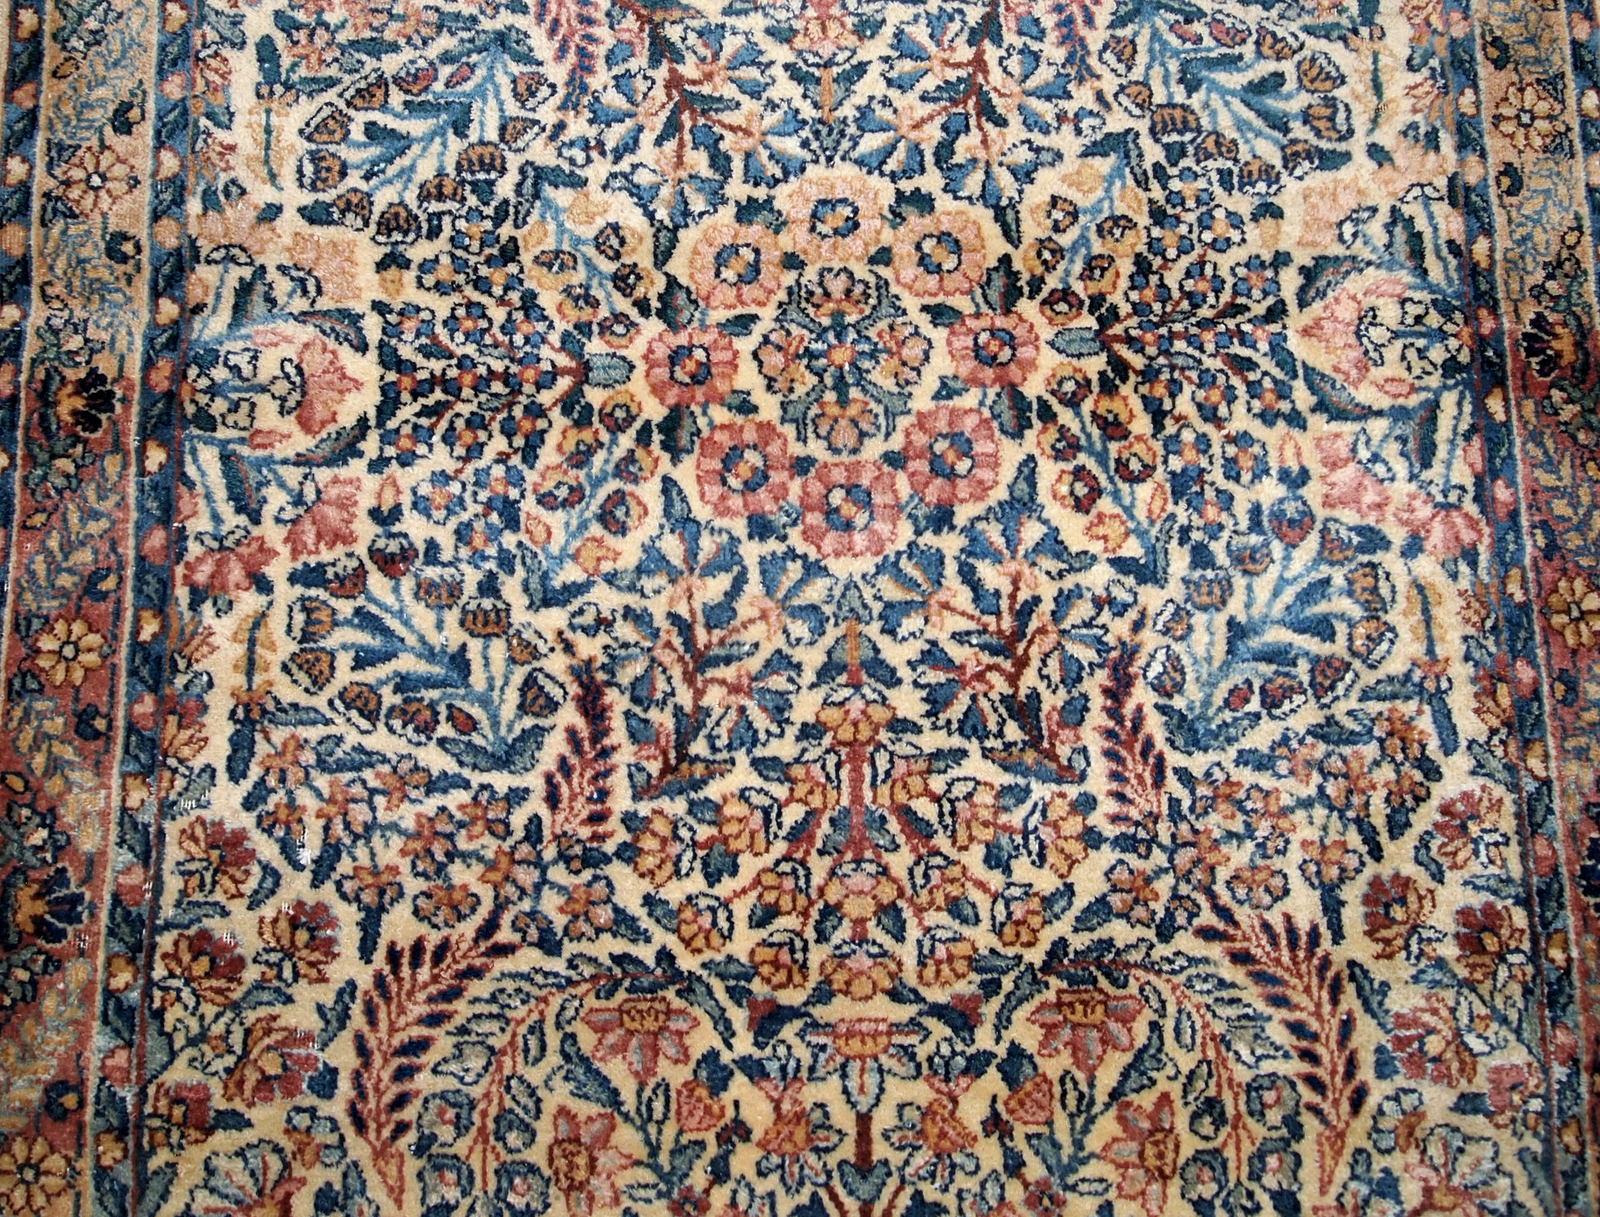 Hand made antique Kerman rug in original good condition from the beginning of 20th century. The rug in in beige shade and with classic floral design.

- Condition: original good,

- circa 1920s,

- Size: 3.1' x 5.2' (94cm x 158cm),

-